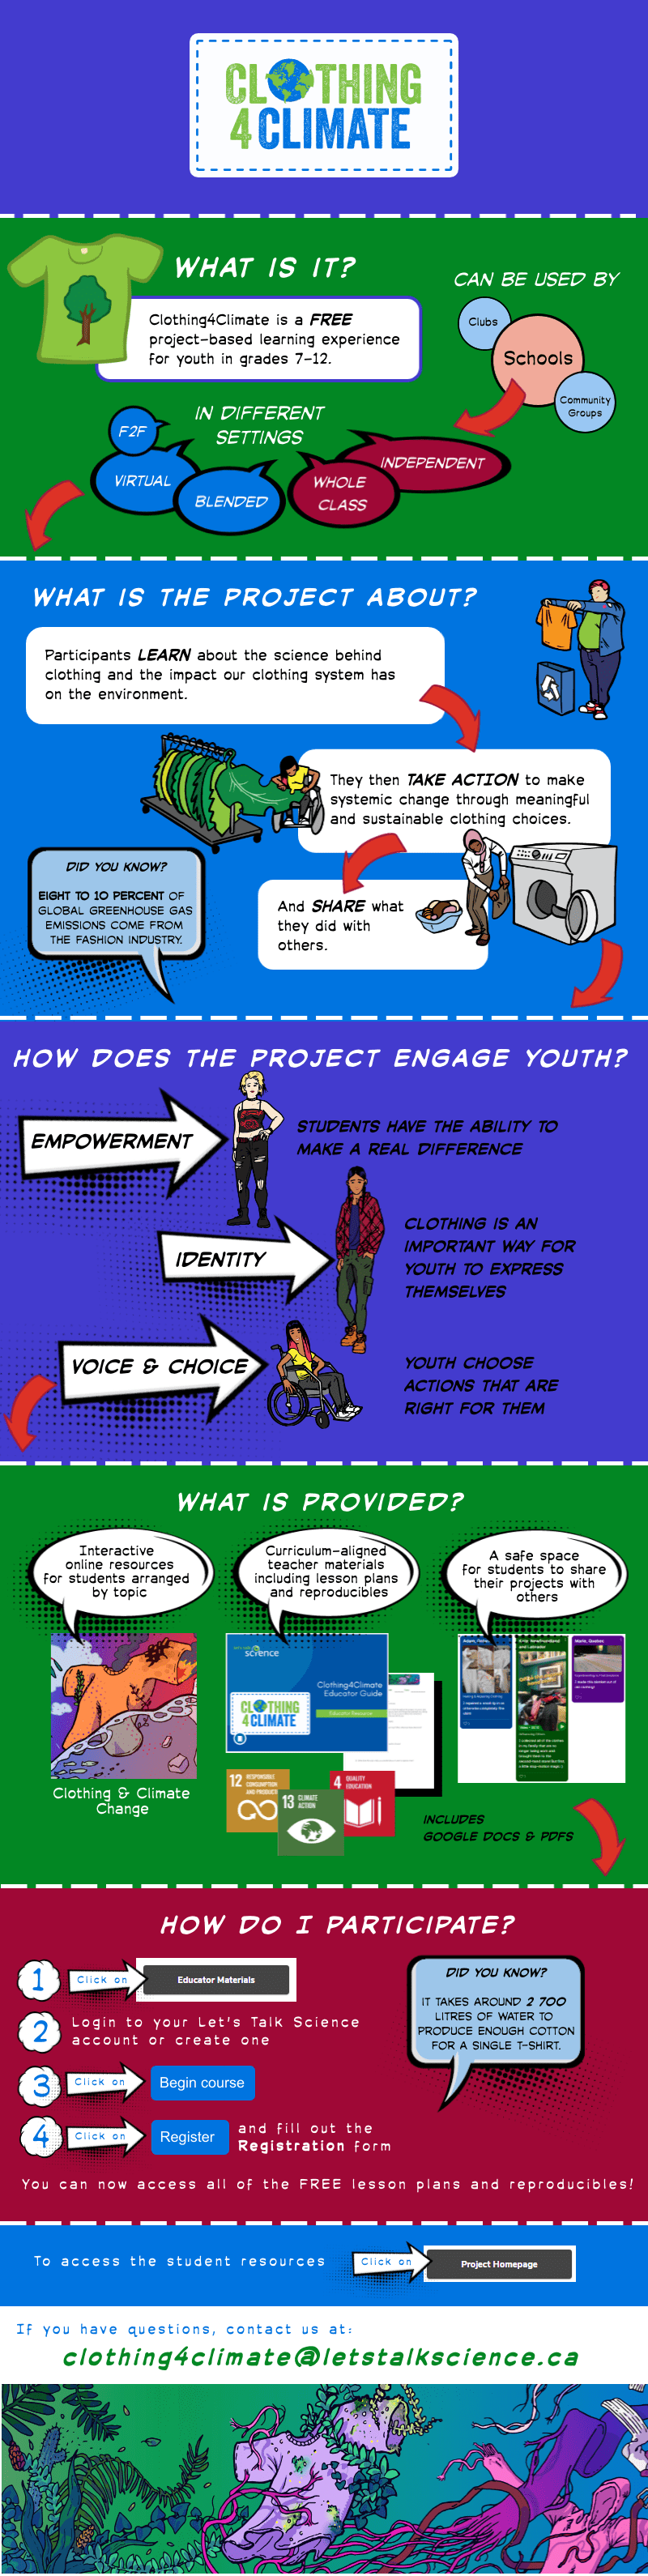 Infographic about Clothing4Climate Project